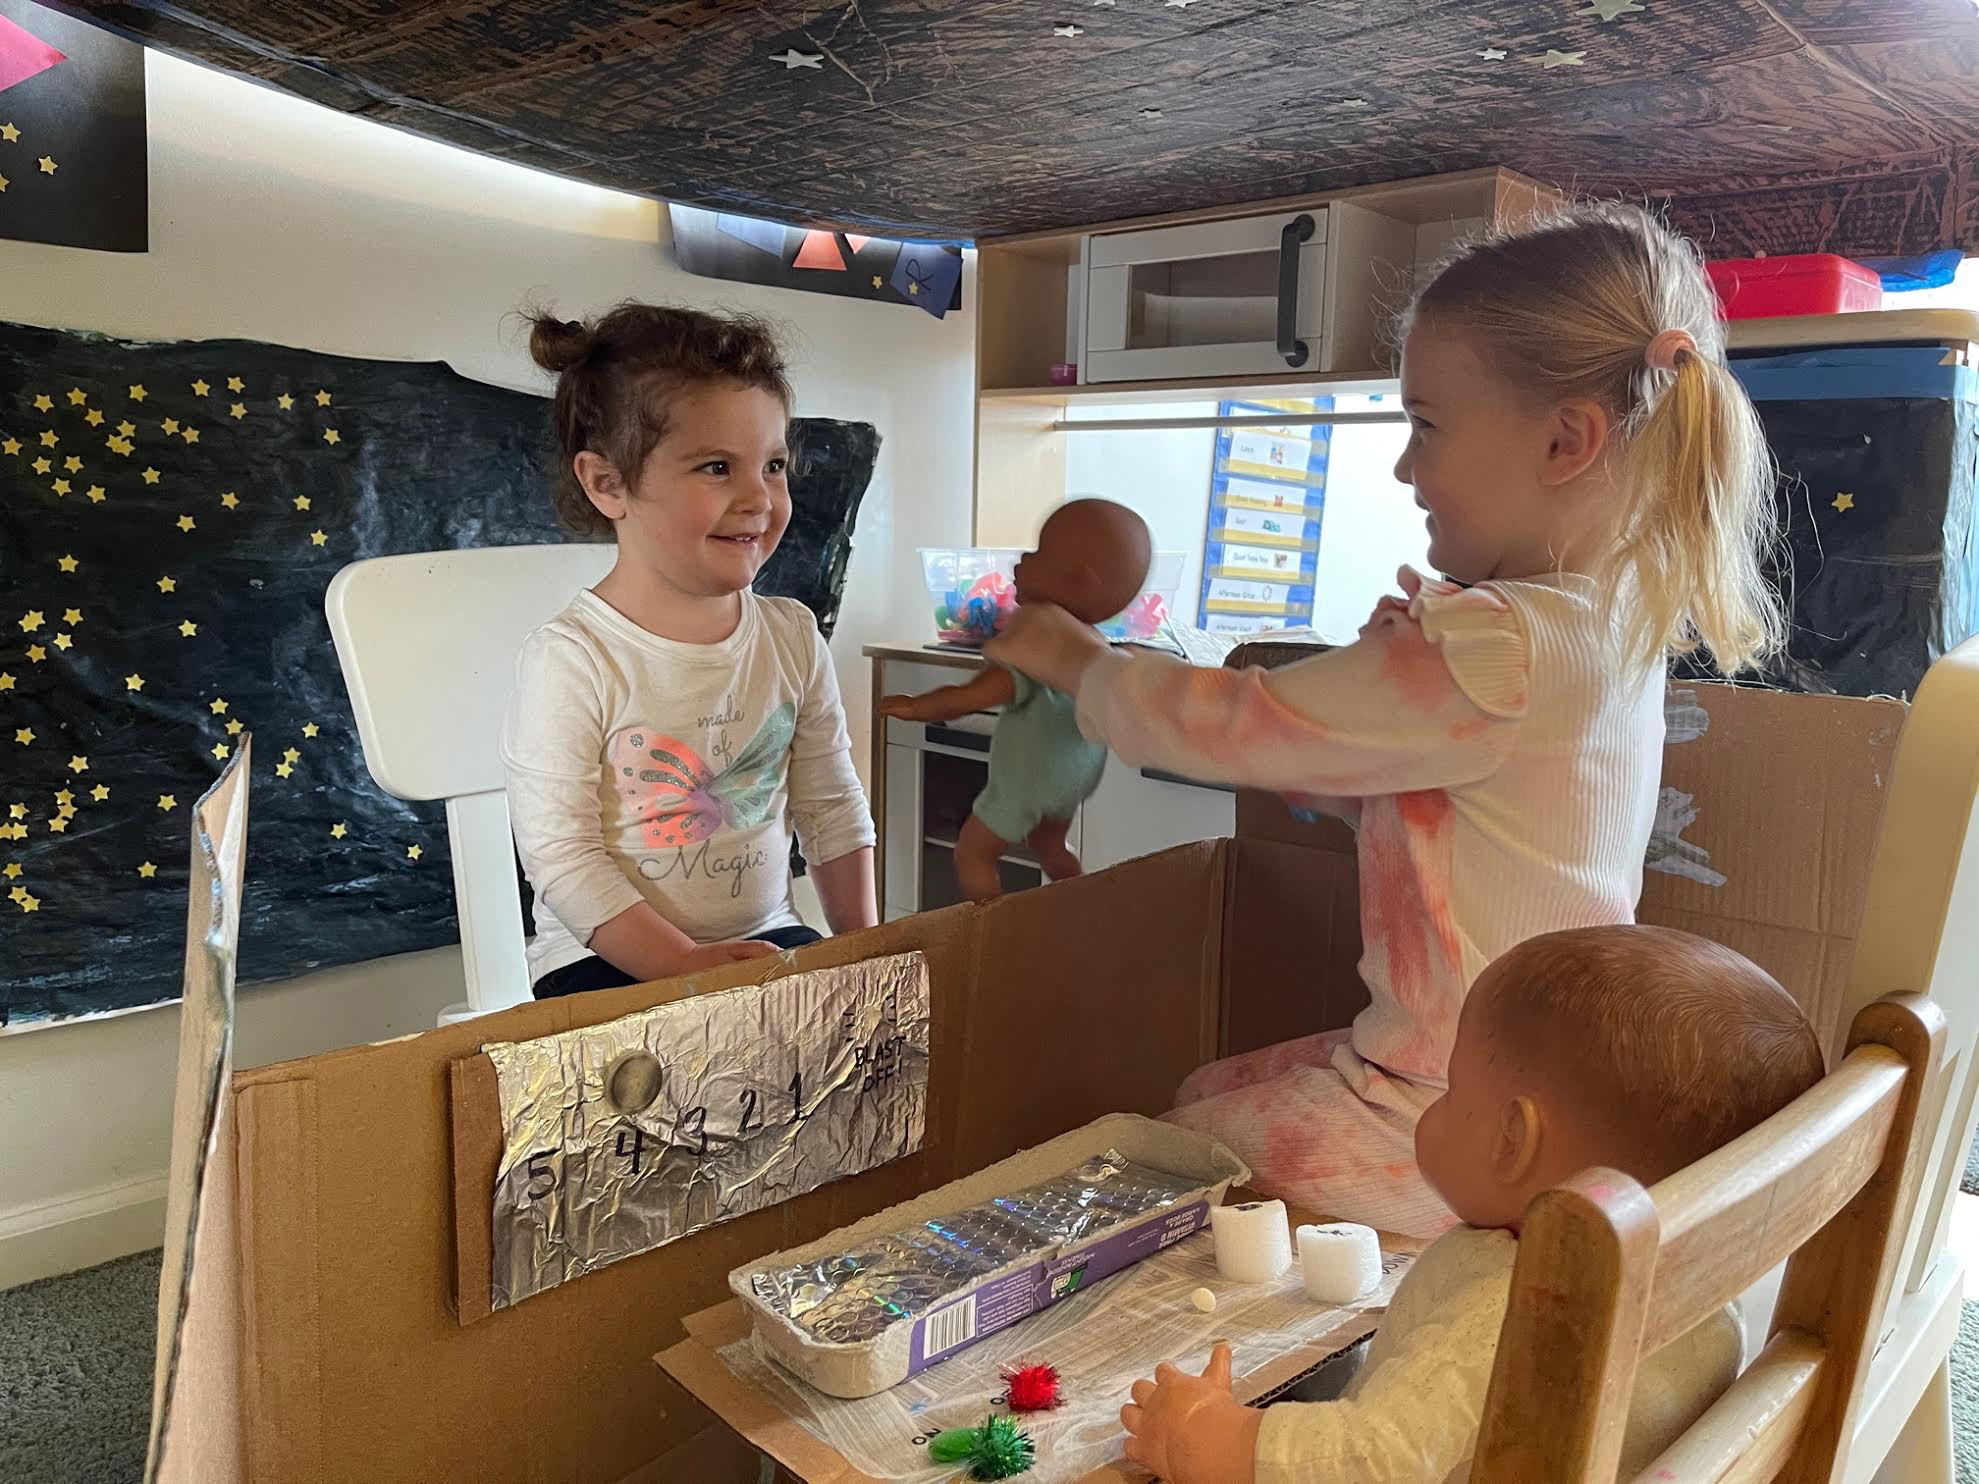 Young children playing house with play set.